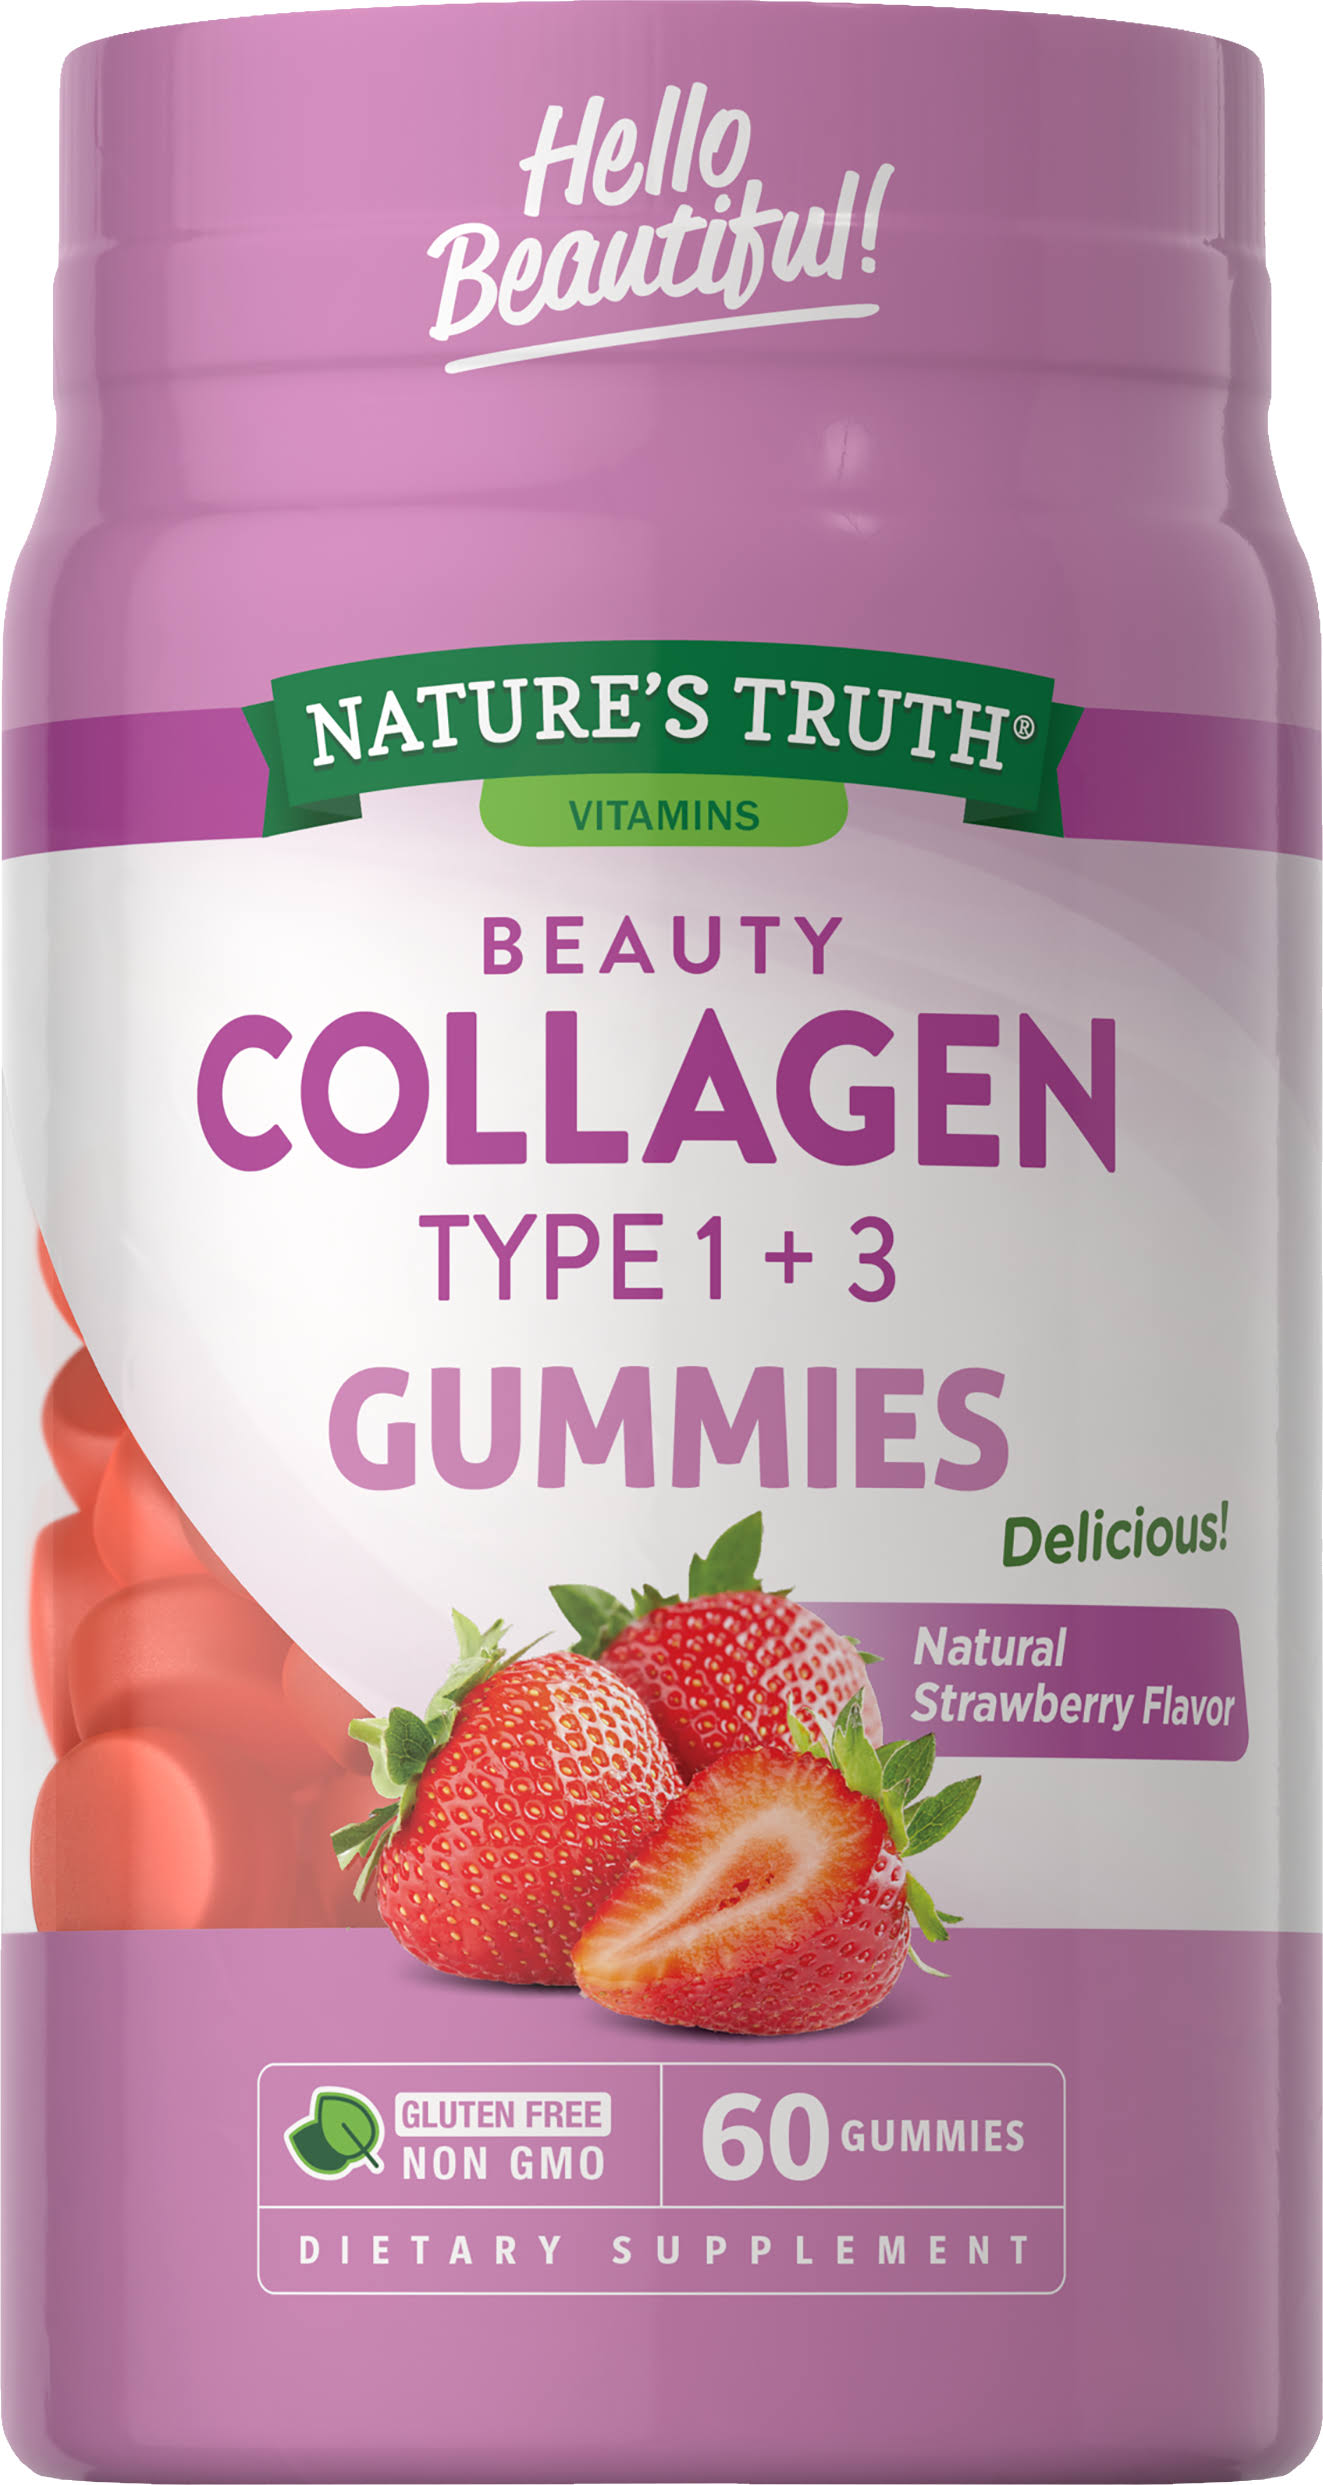 Nature's Truth Beauty Collagen Type 1 + 3 Gummies 60 Co